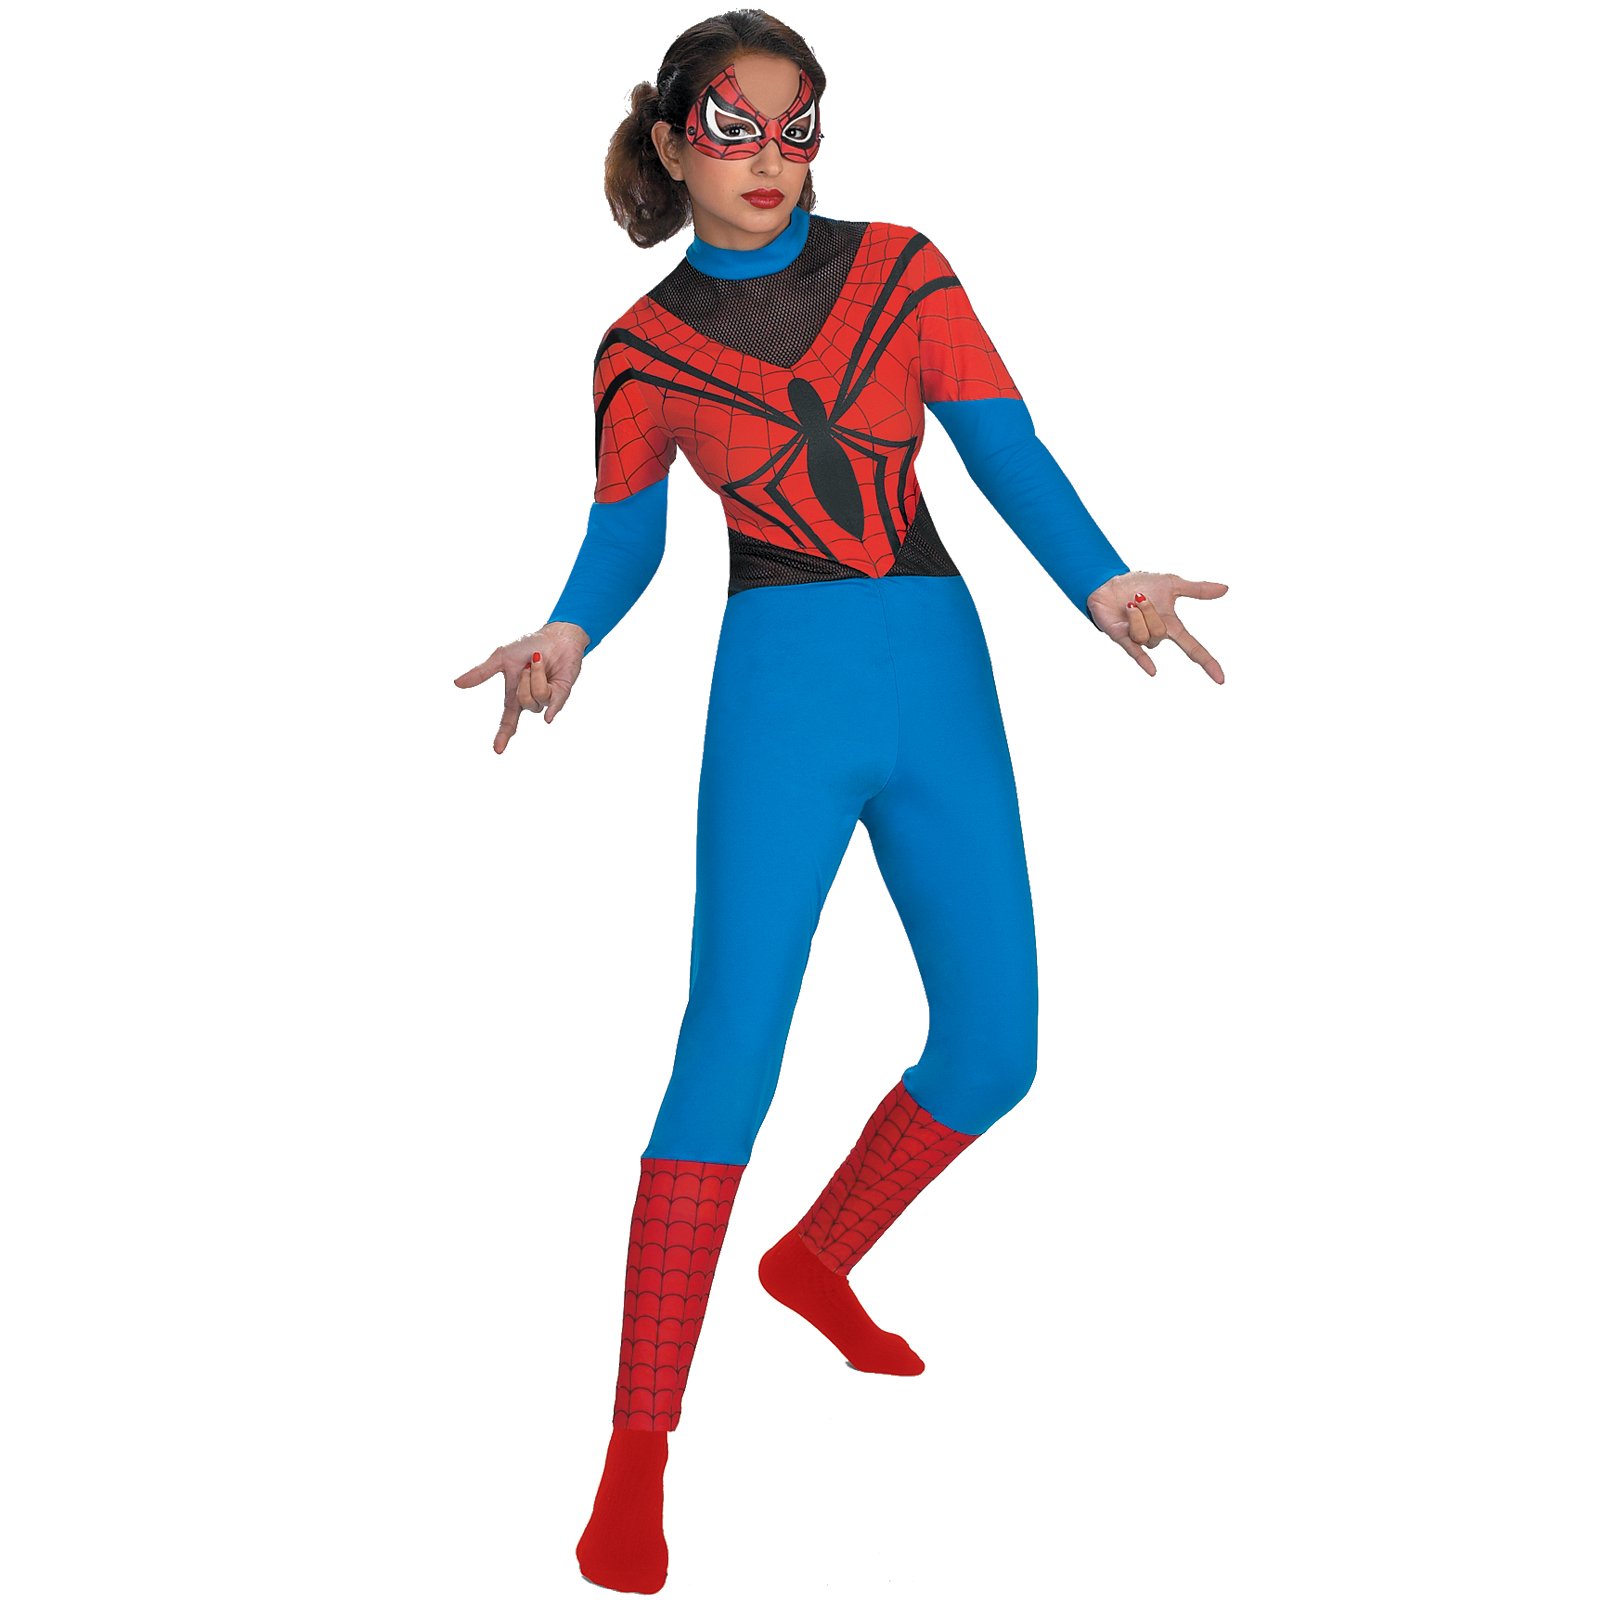 Spider-Man SPIDER GIRL Teen (fits up to 9 size) - Click Image to Close